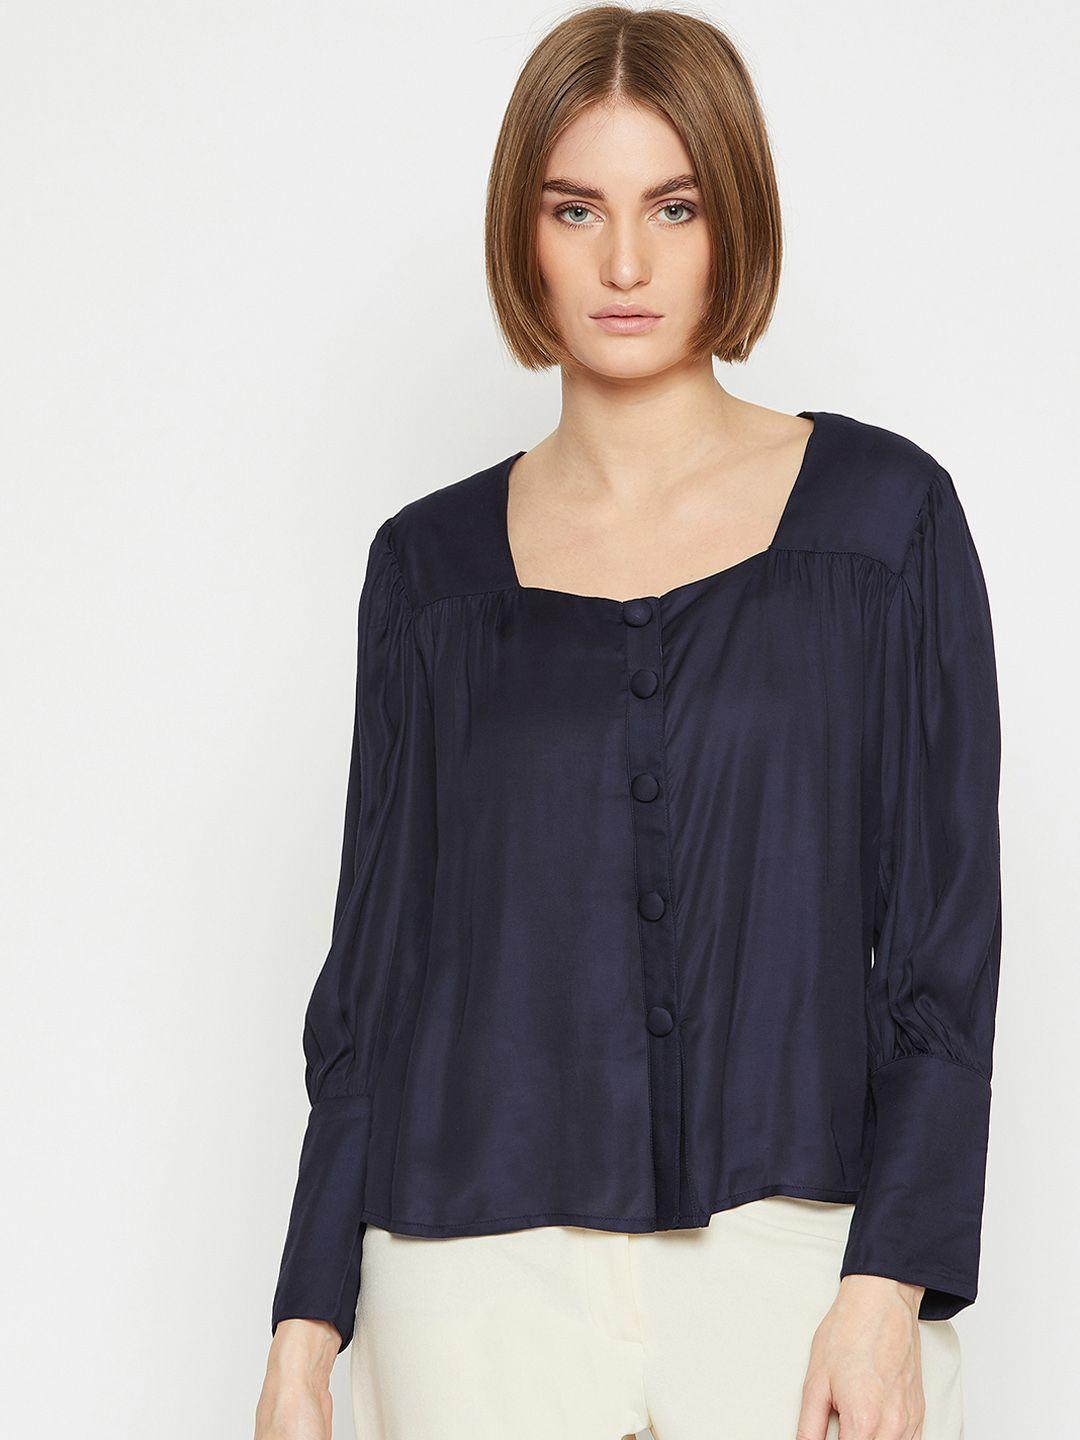 marie claire women navy blue solid a-line top